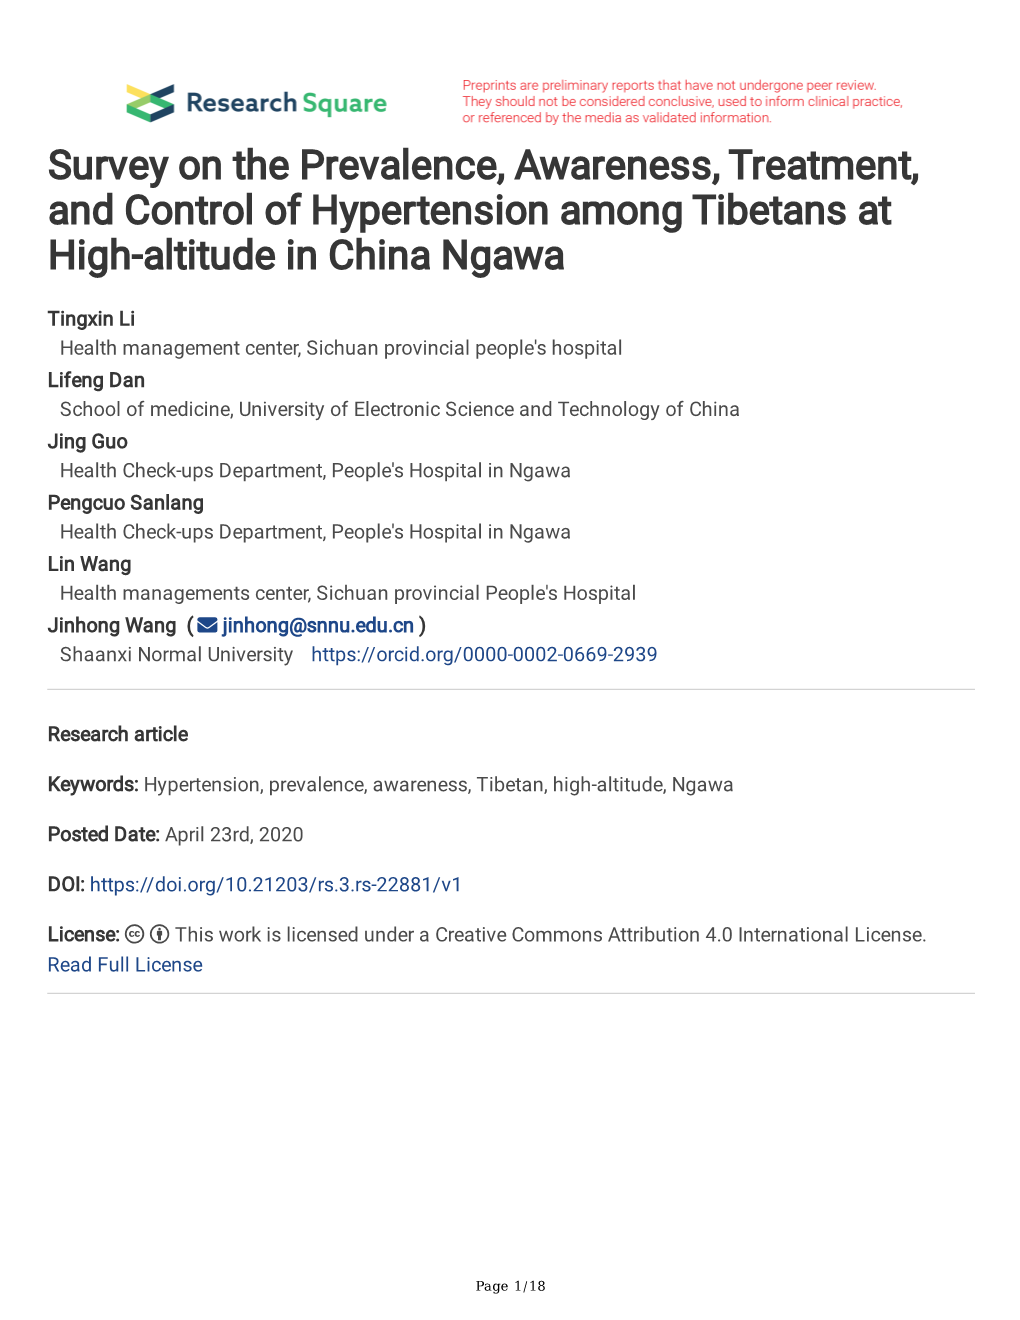 Survey on the Prevalence, Awareness, Treatment, and Control of Hypertension Among Tibetans at High-Altitude in China Ngawa